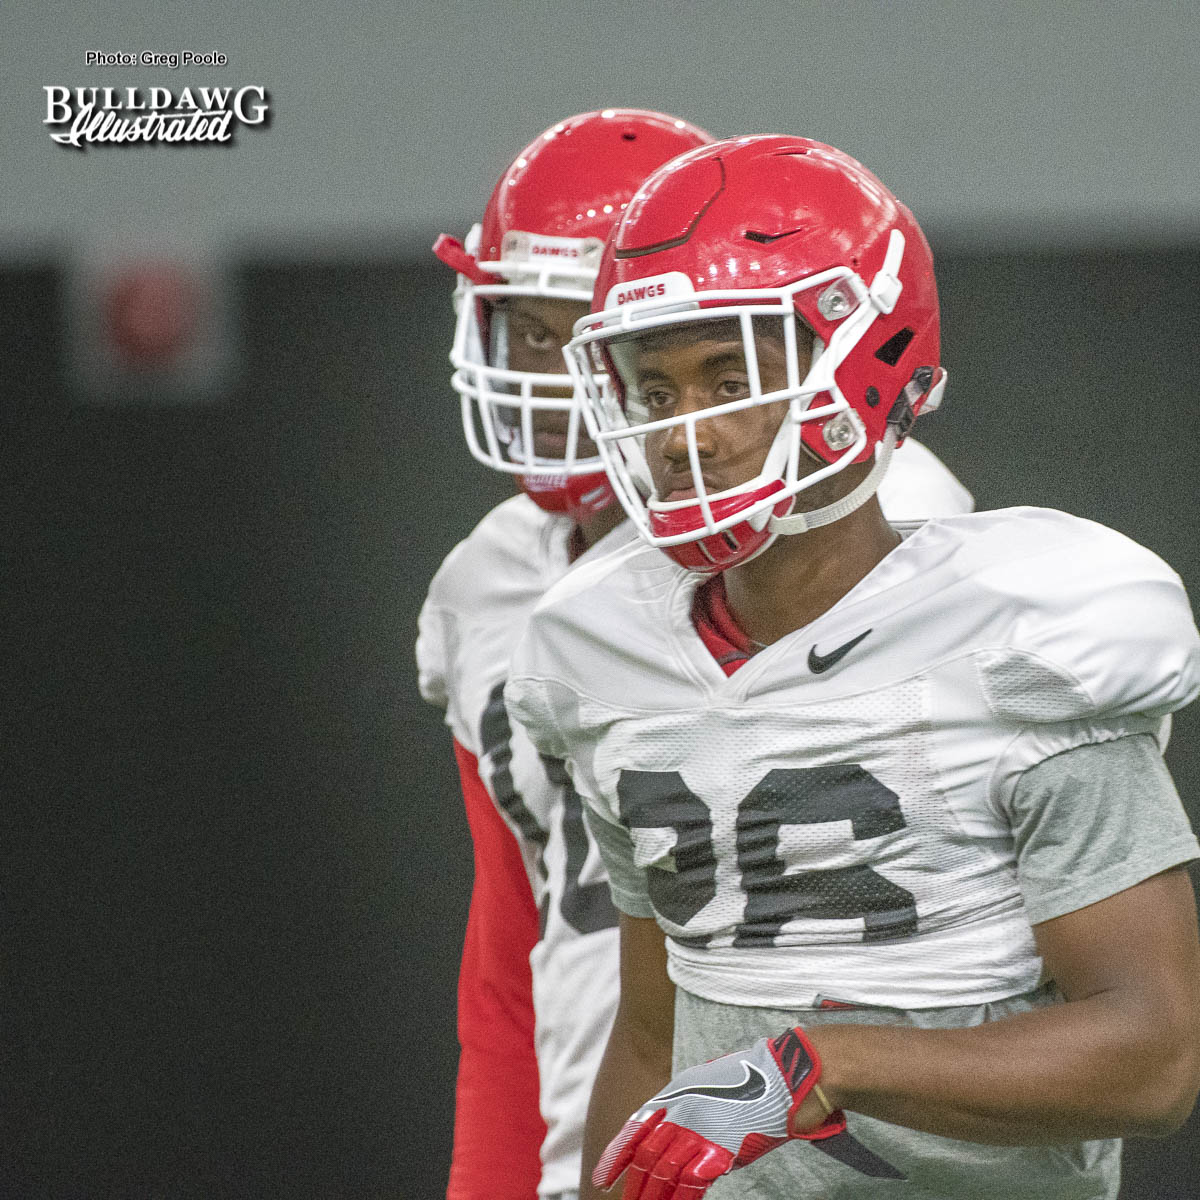 Tyrique McGhee (26) - Practice No. 13 of UGA Fall Camp - Monday, August 14, 2017